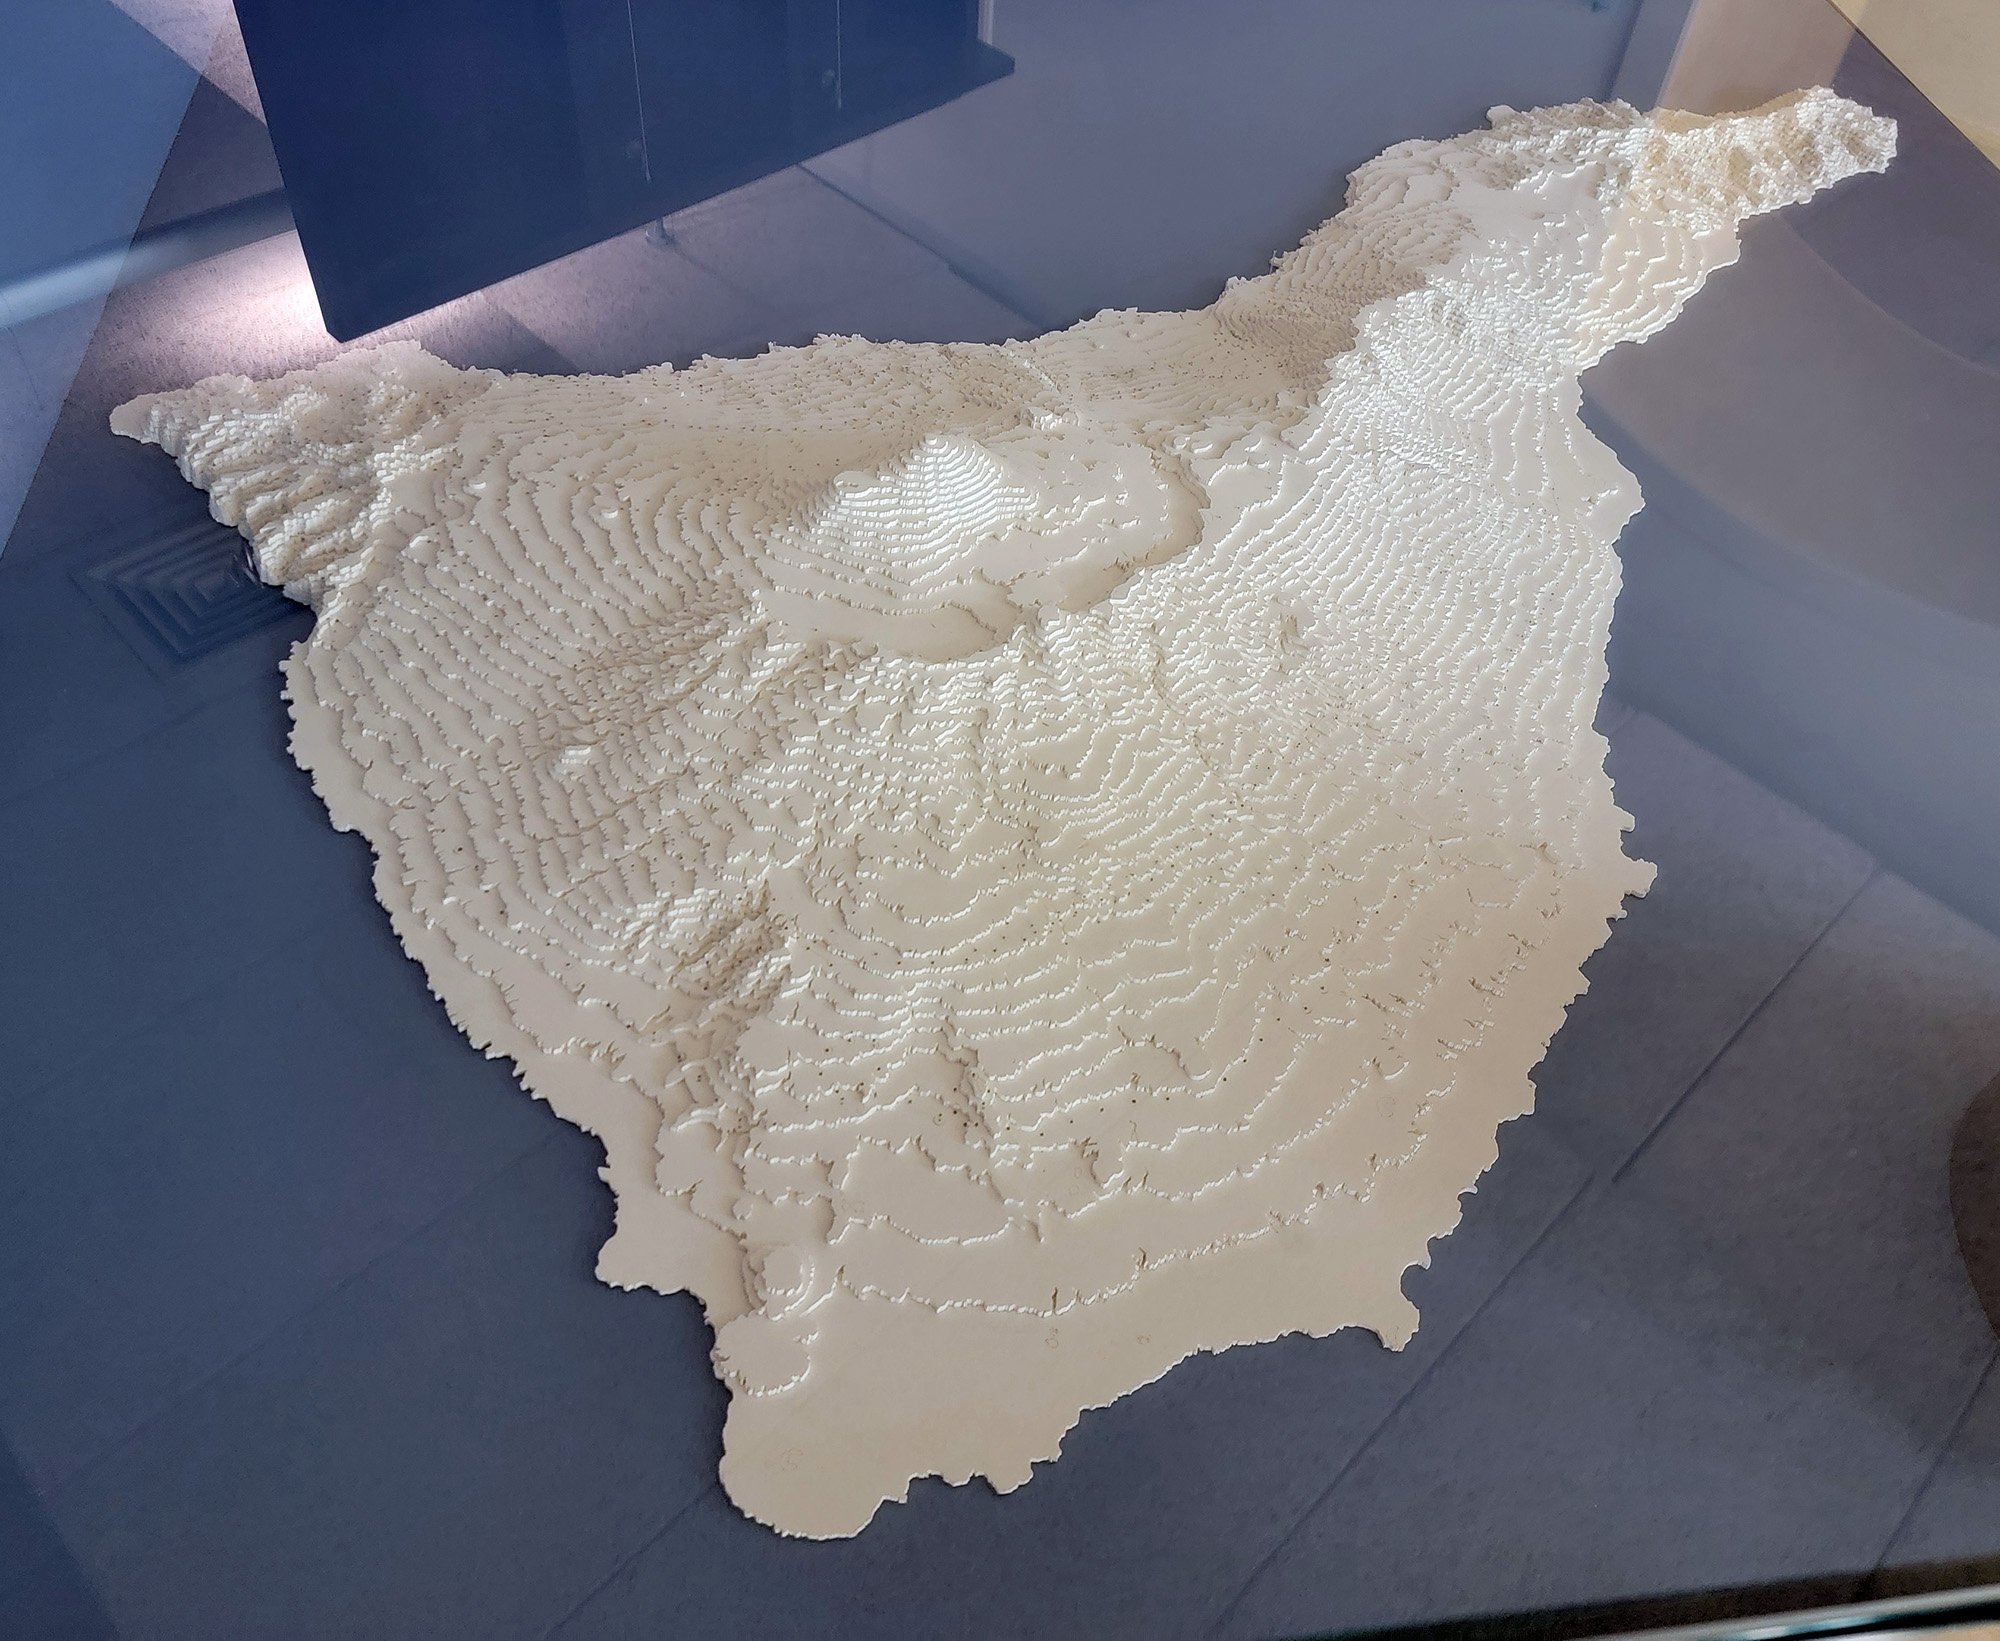 Cool 3D print of the island. You can clearly see the huge crater with the true peak of Teide standing in the middle.